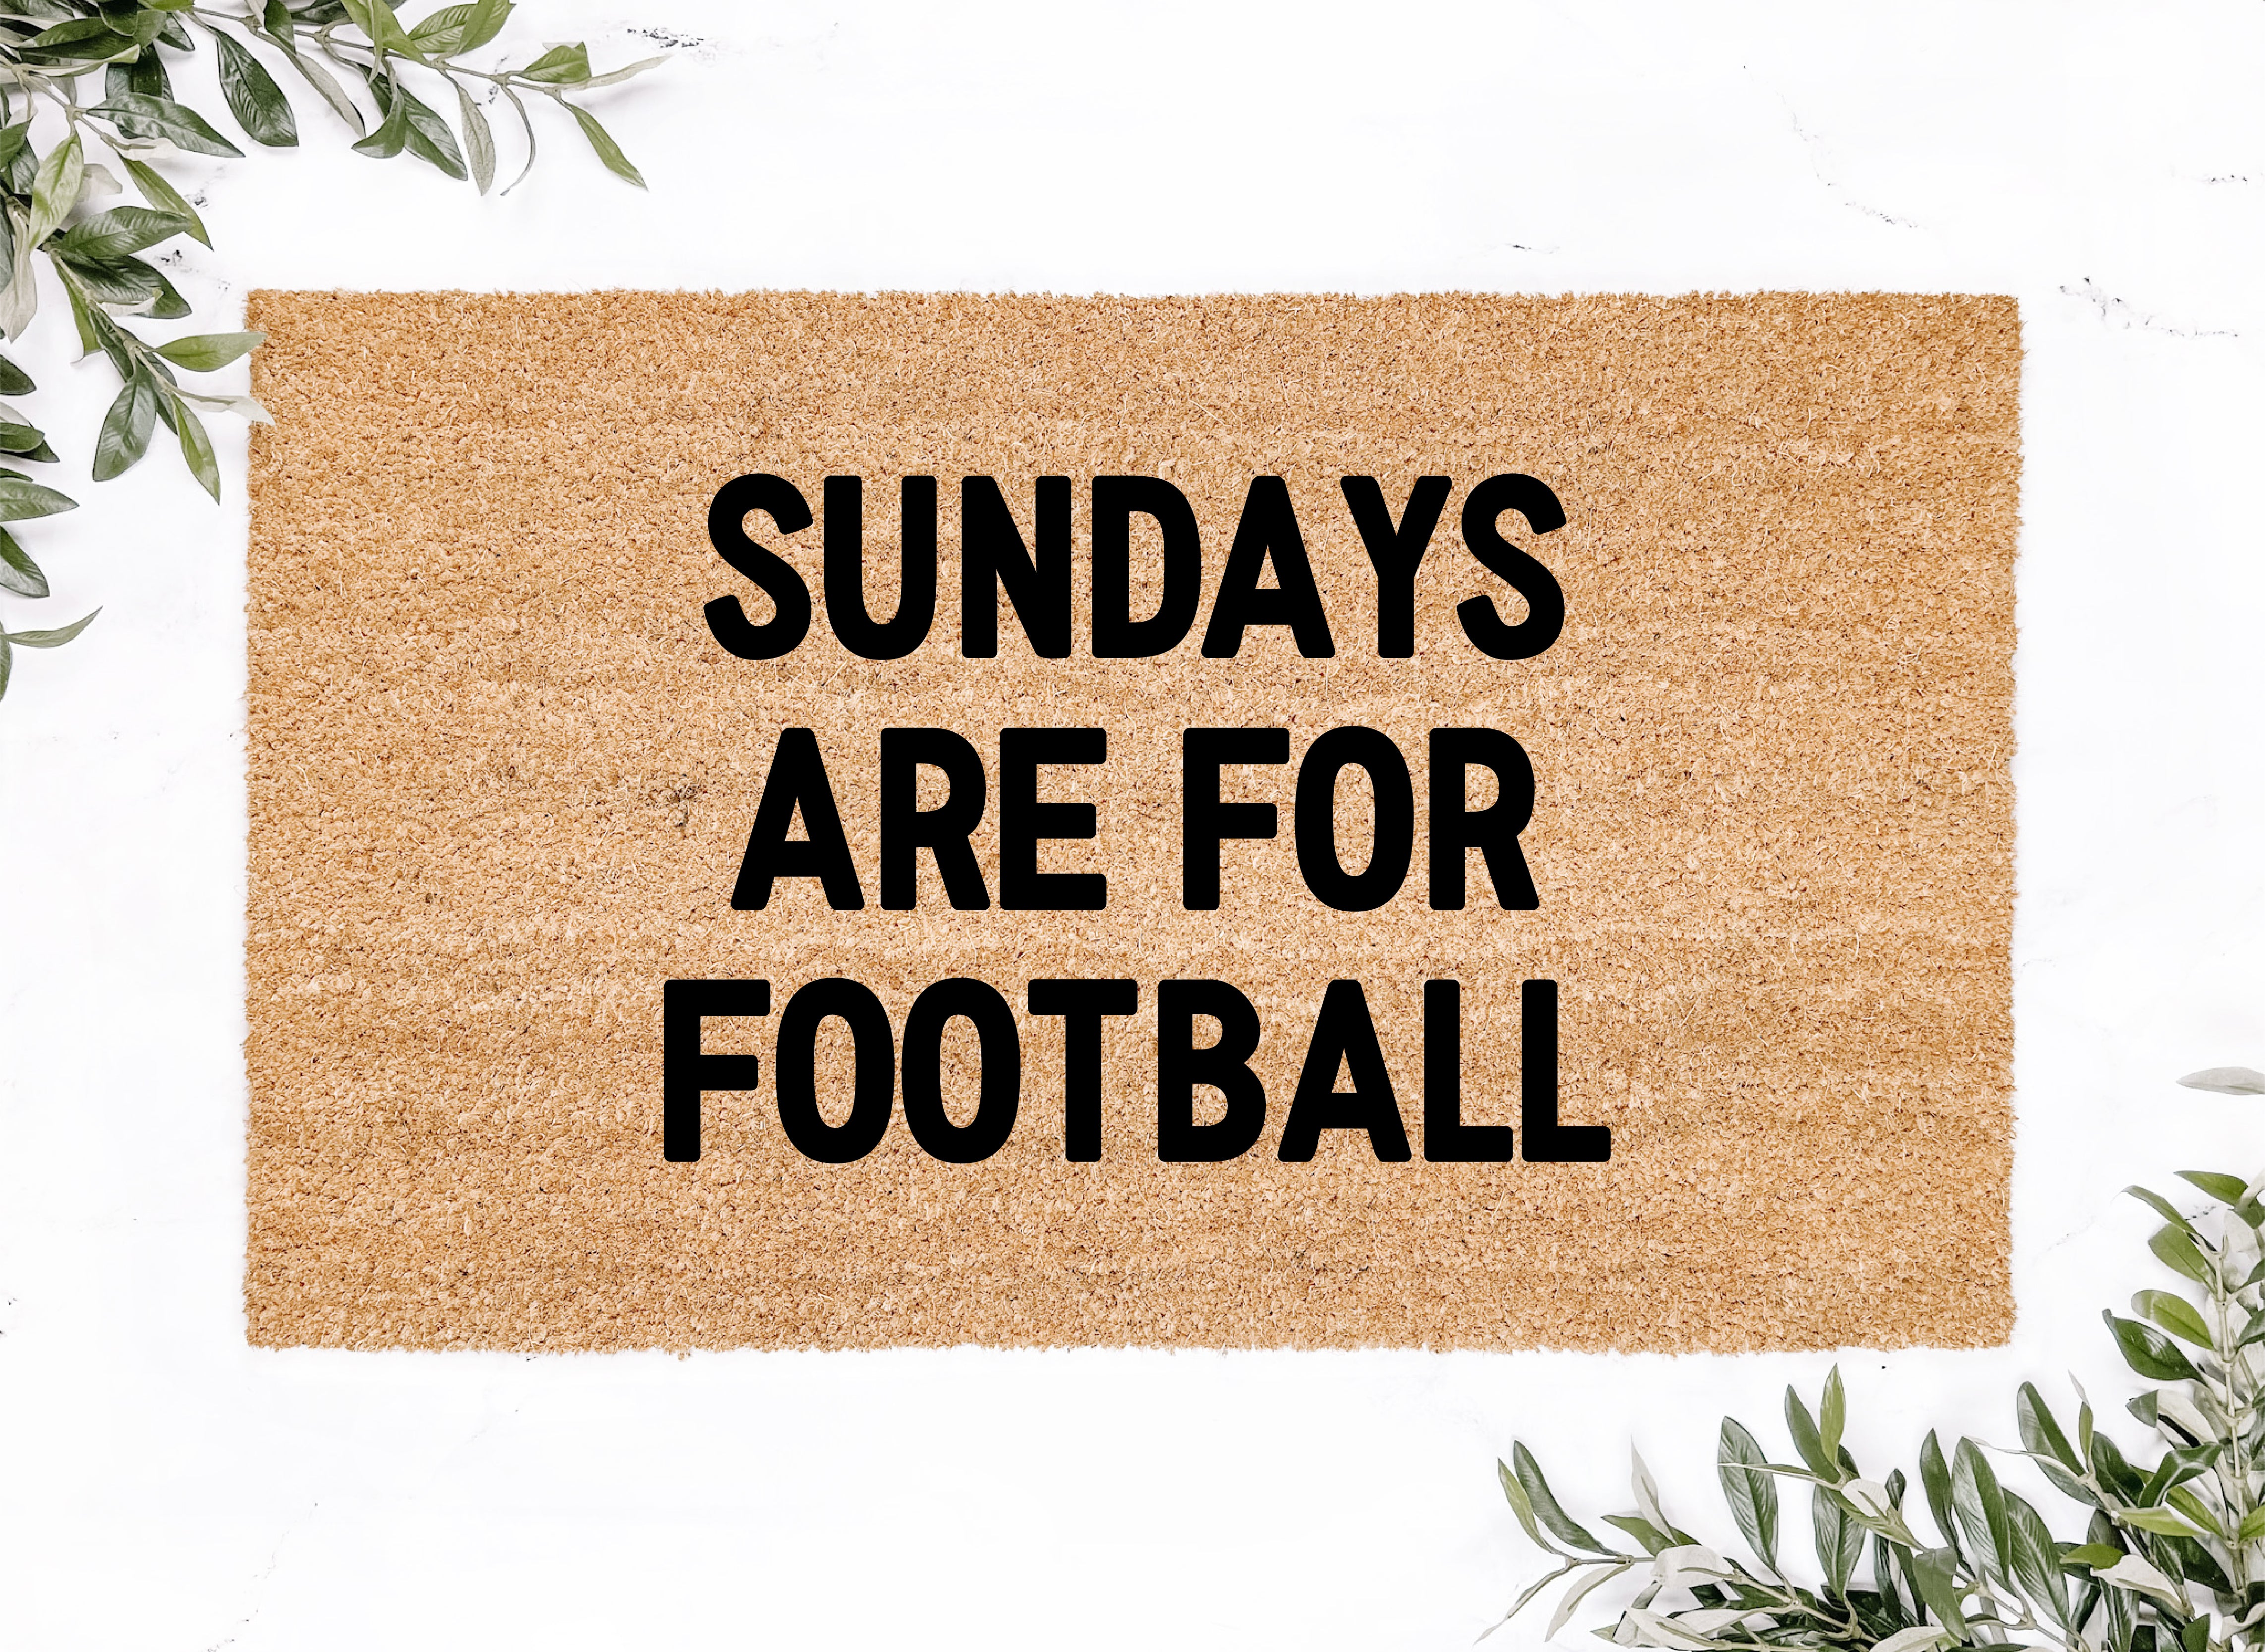 Sundays are for Football Block Letter Doormat